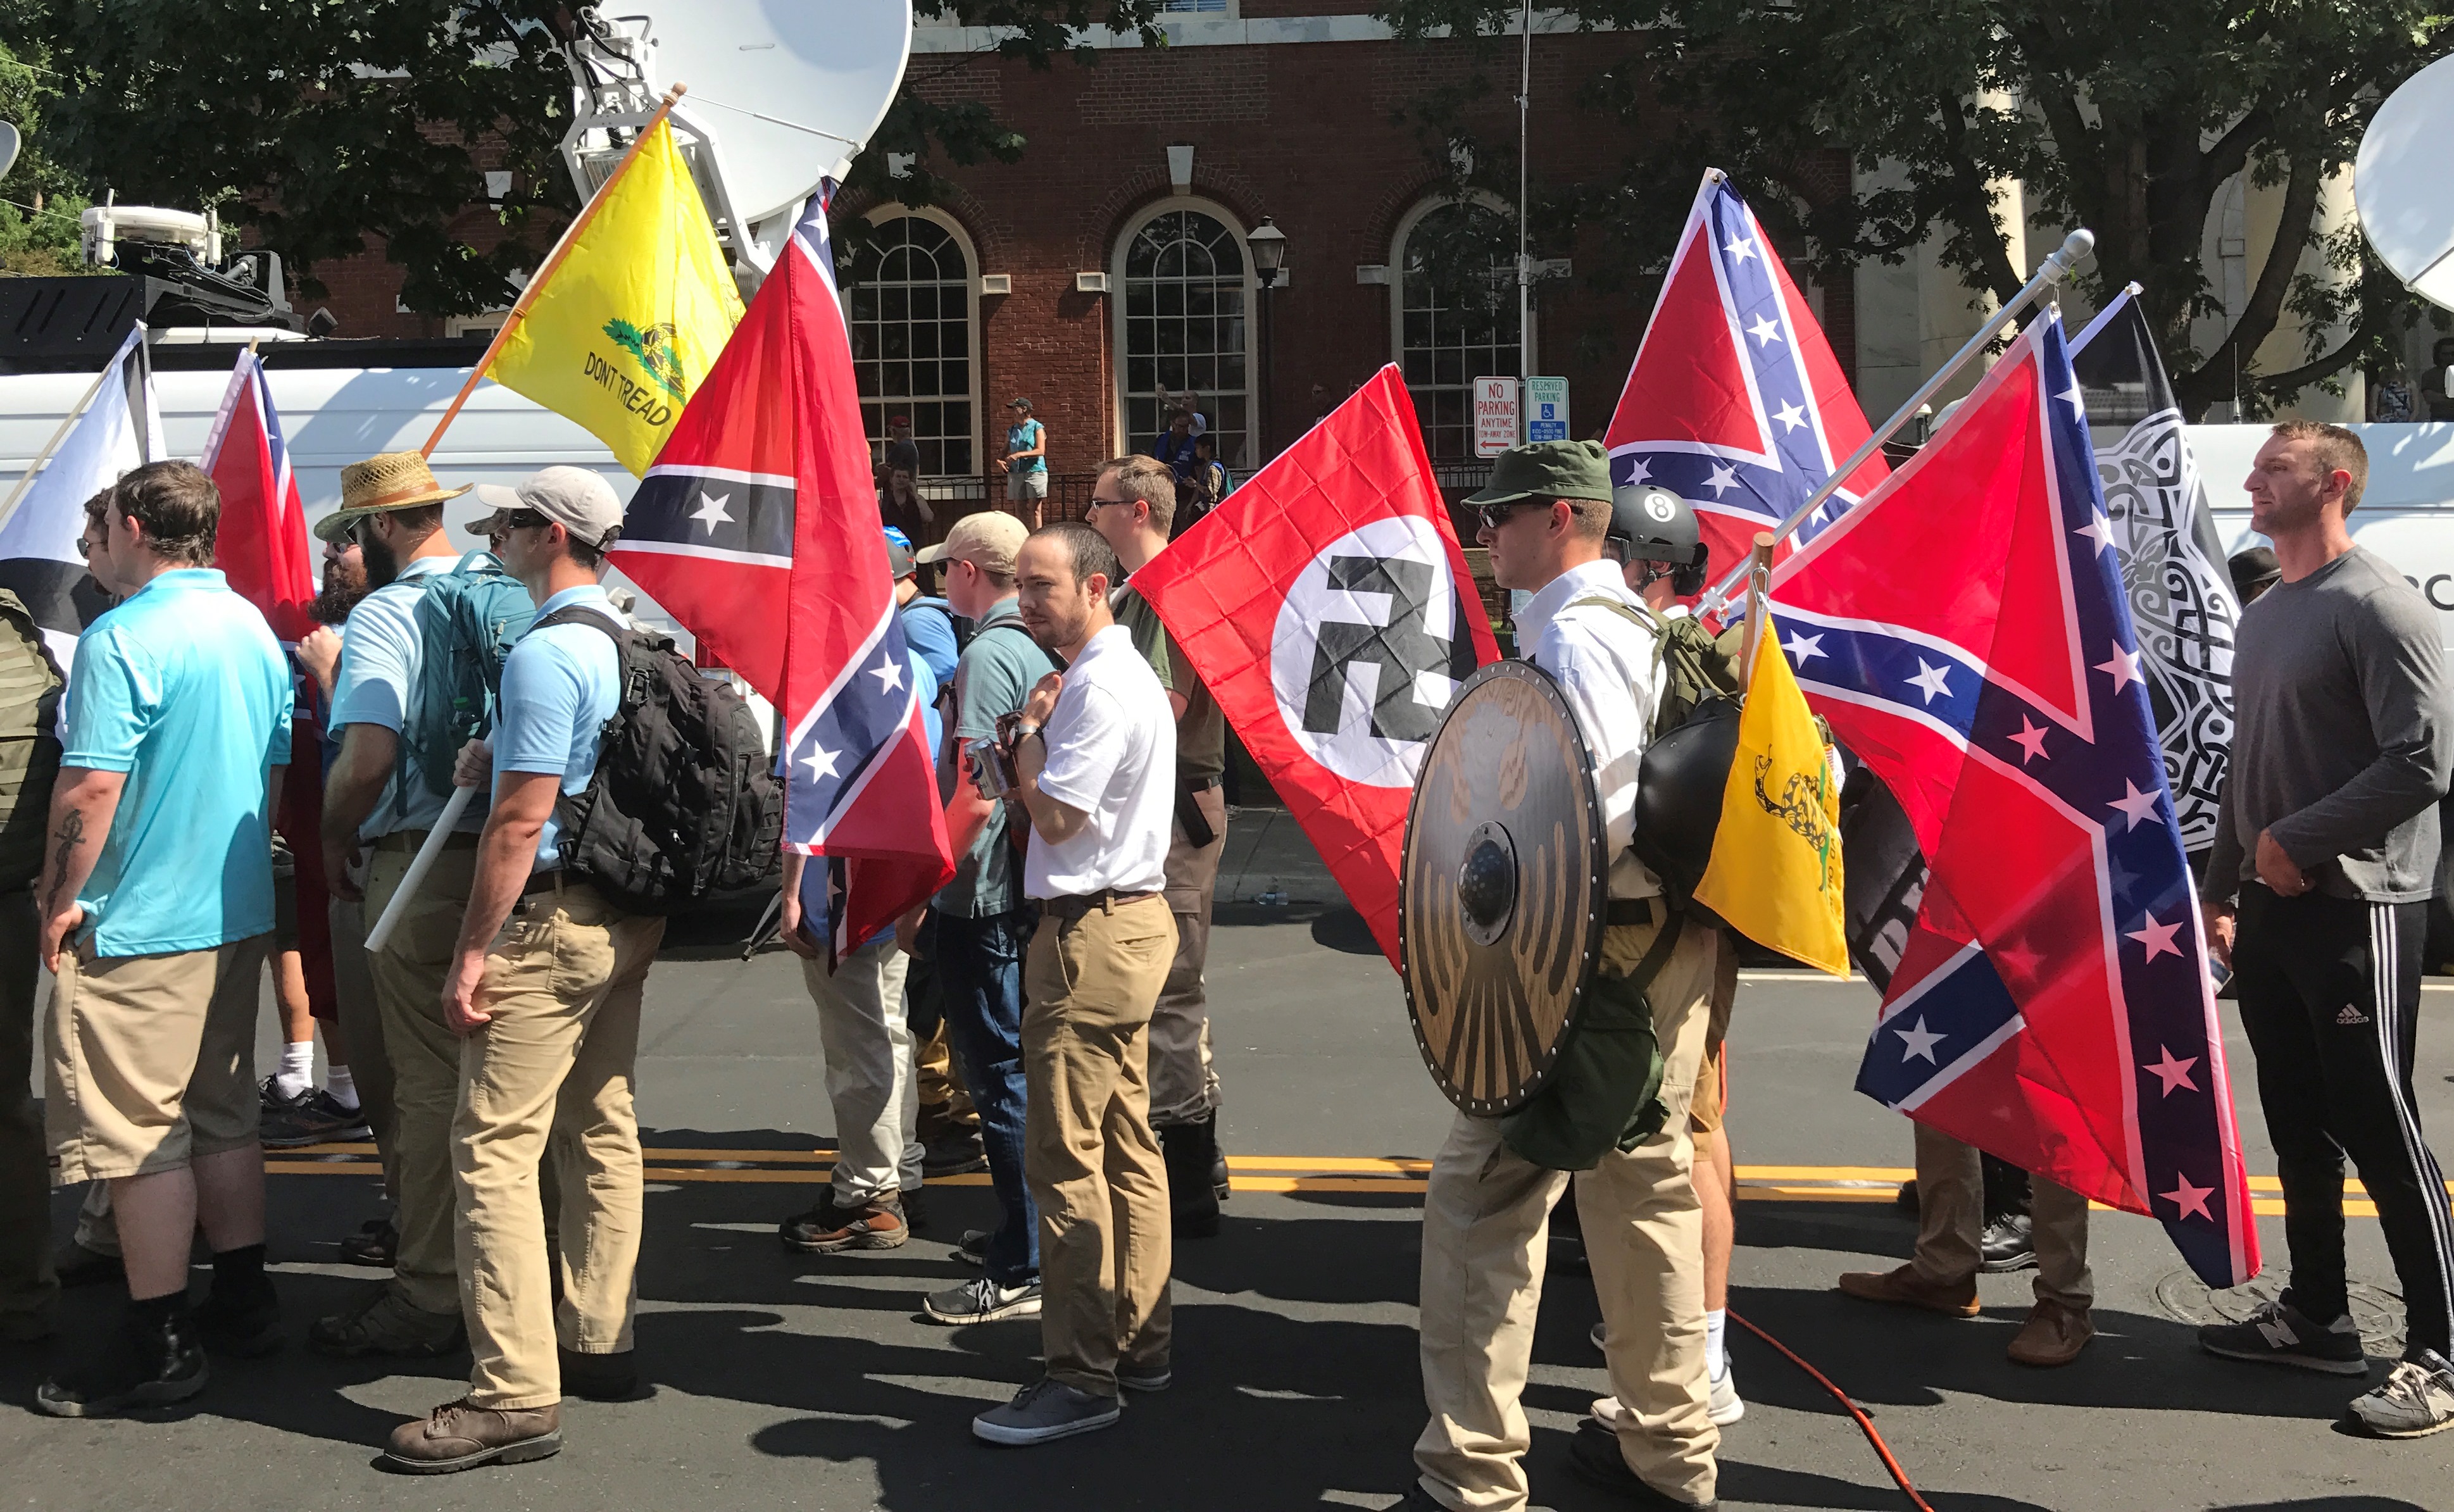 A photo of white supremacists holding swastika and confederate flags.